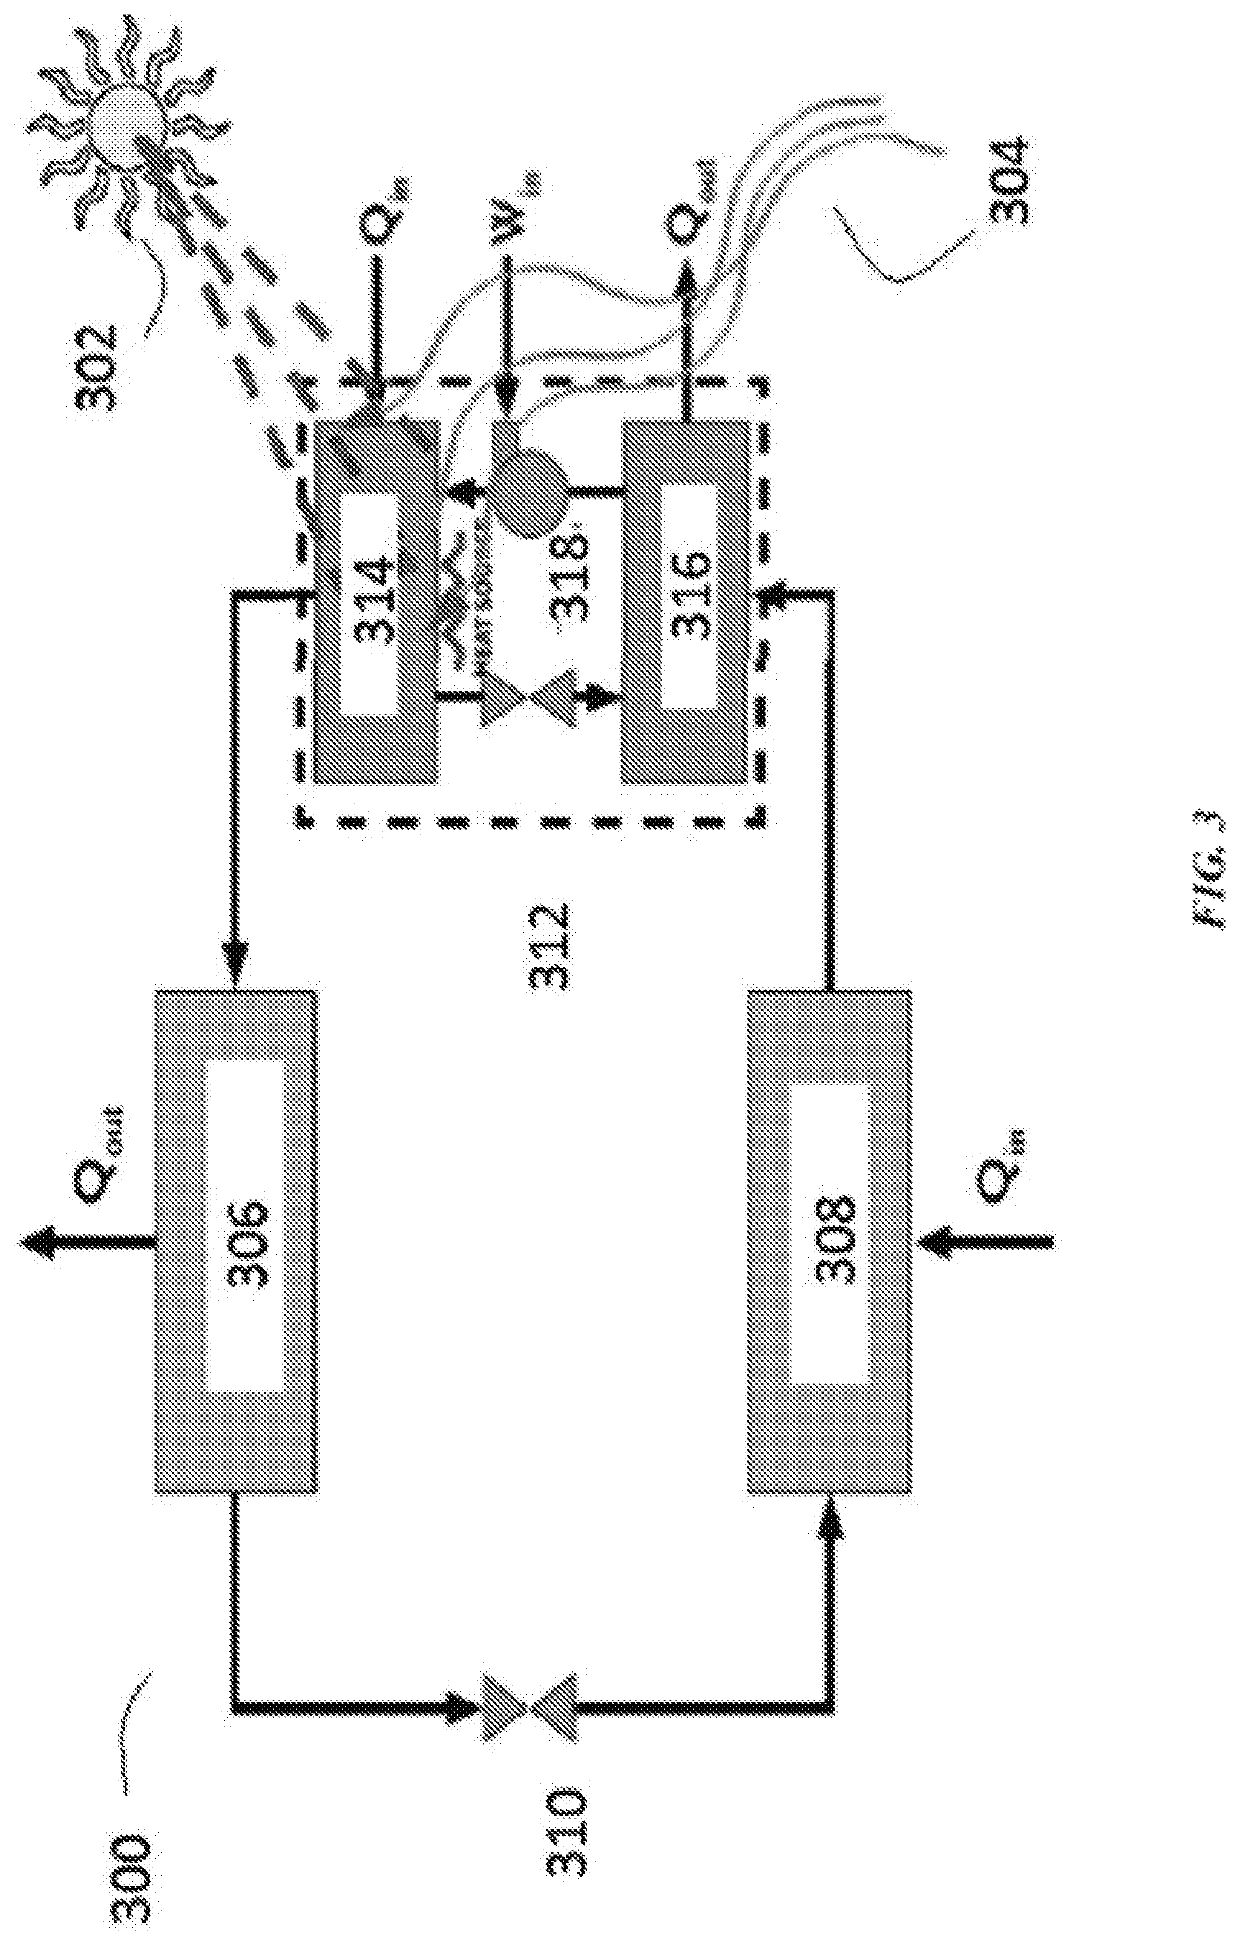 Microwave assisted hybrid solar vapor absorption refrigeration systems